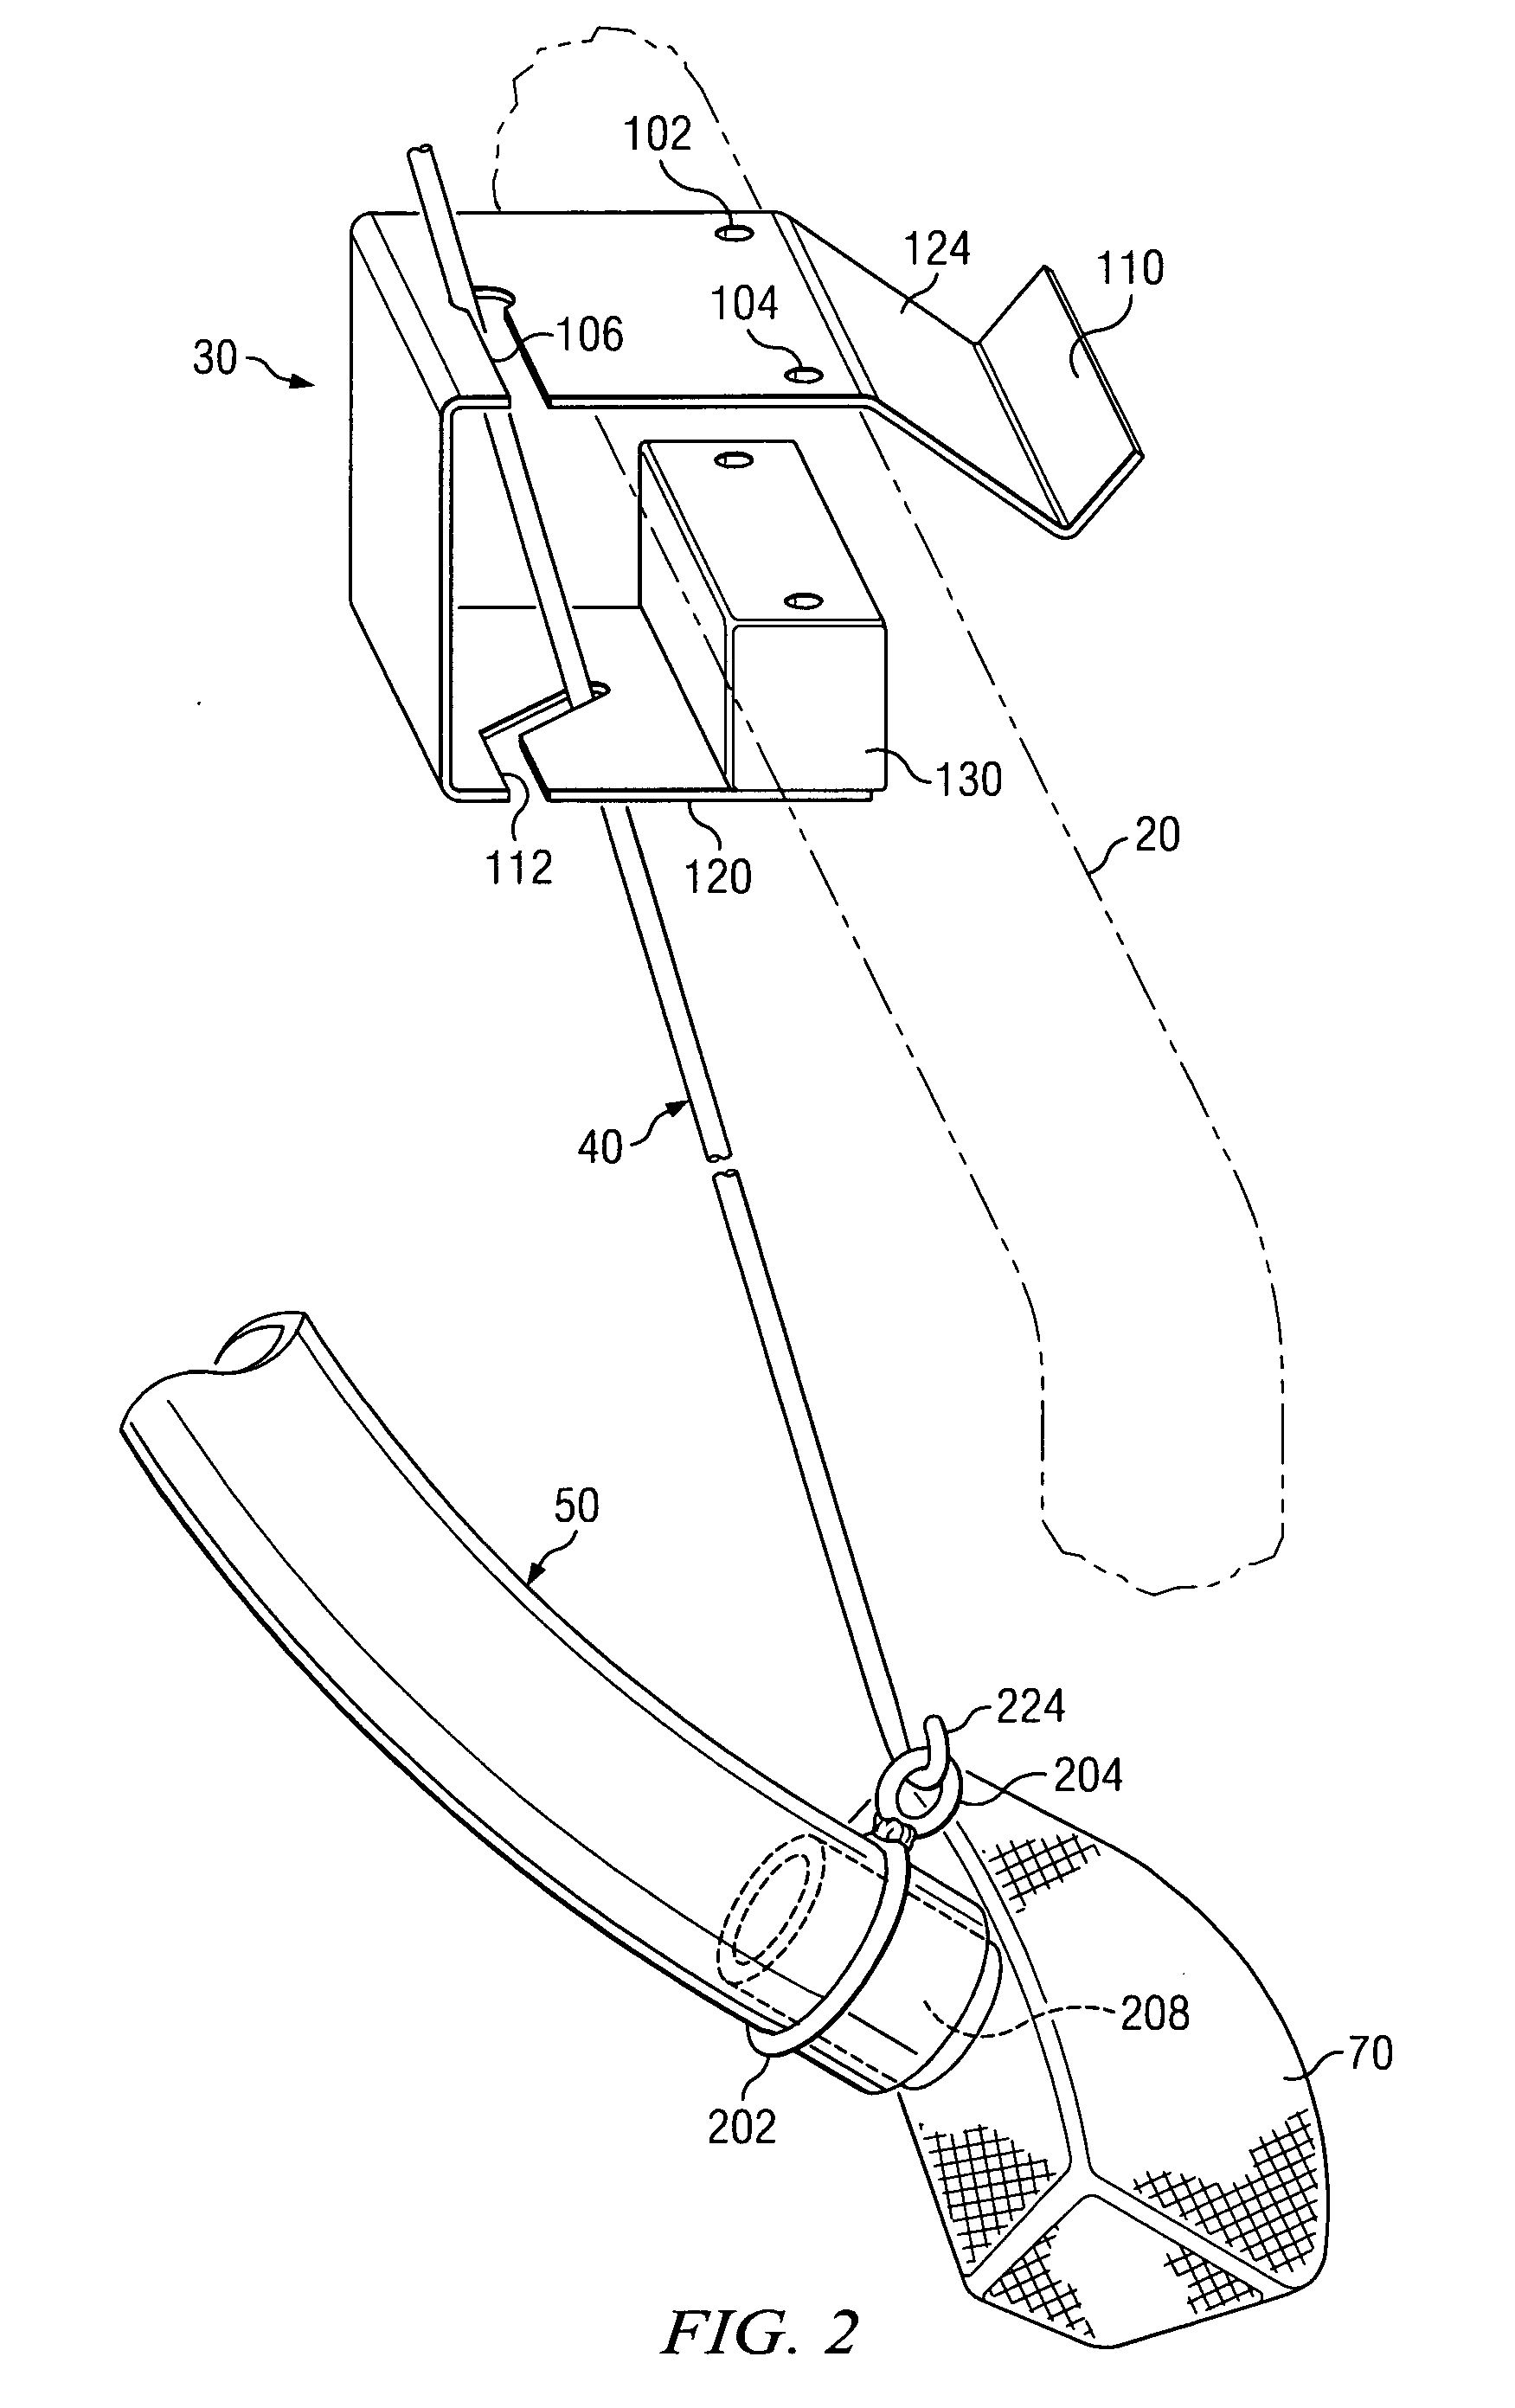 Apparatus and method for efficient dispensing of fluids from a container